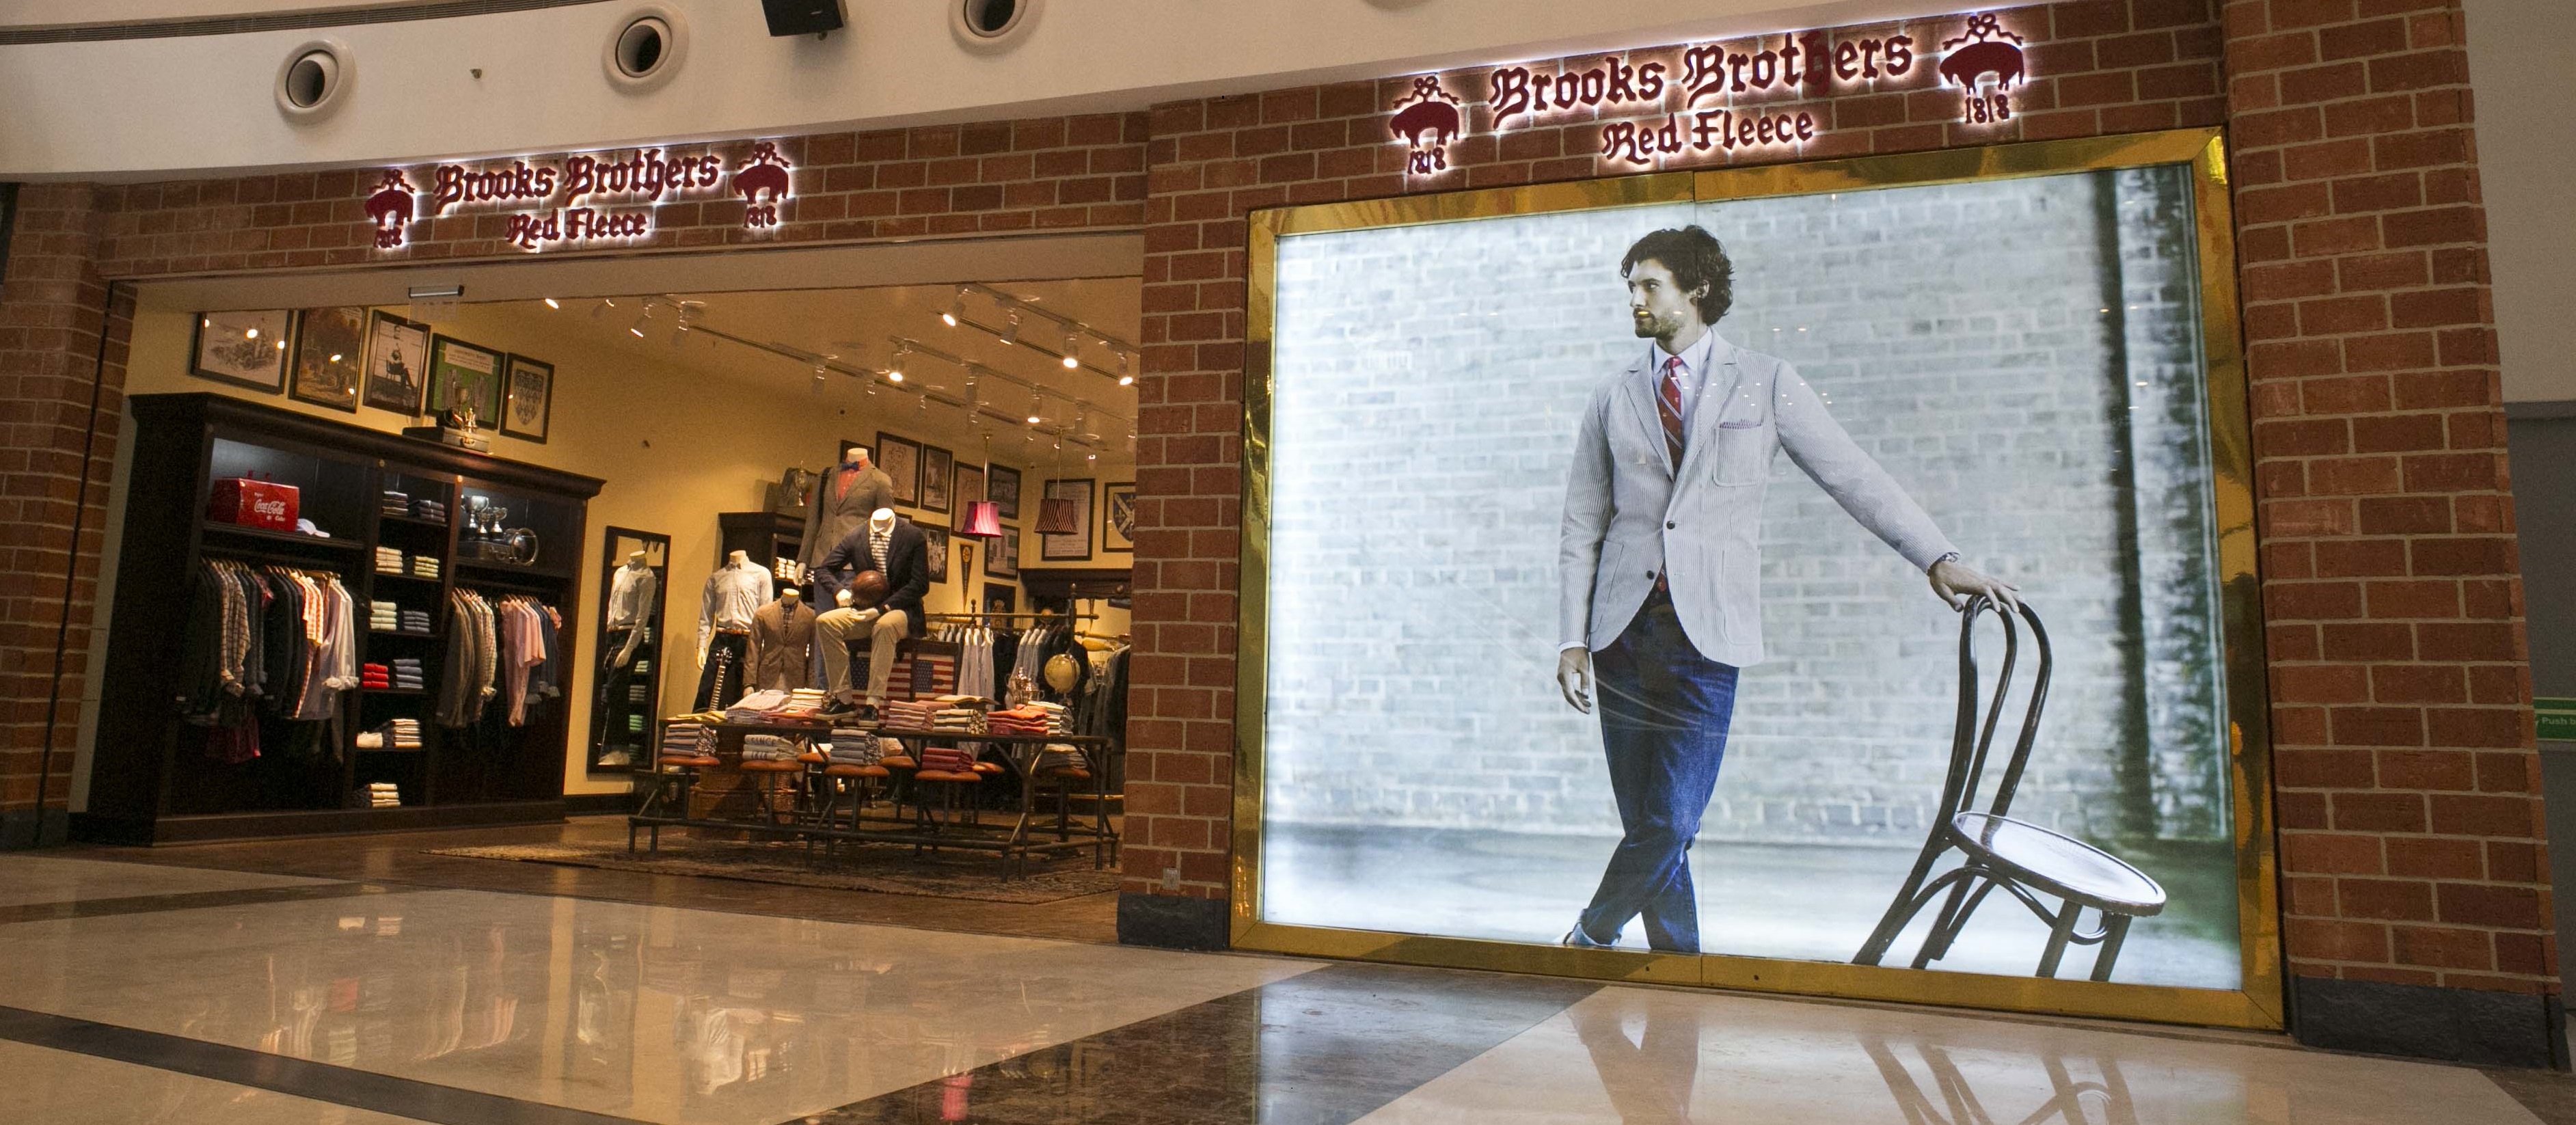 Brooks Brothers' store at Mall of India 